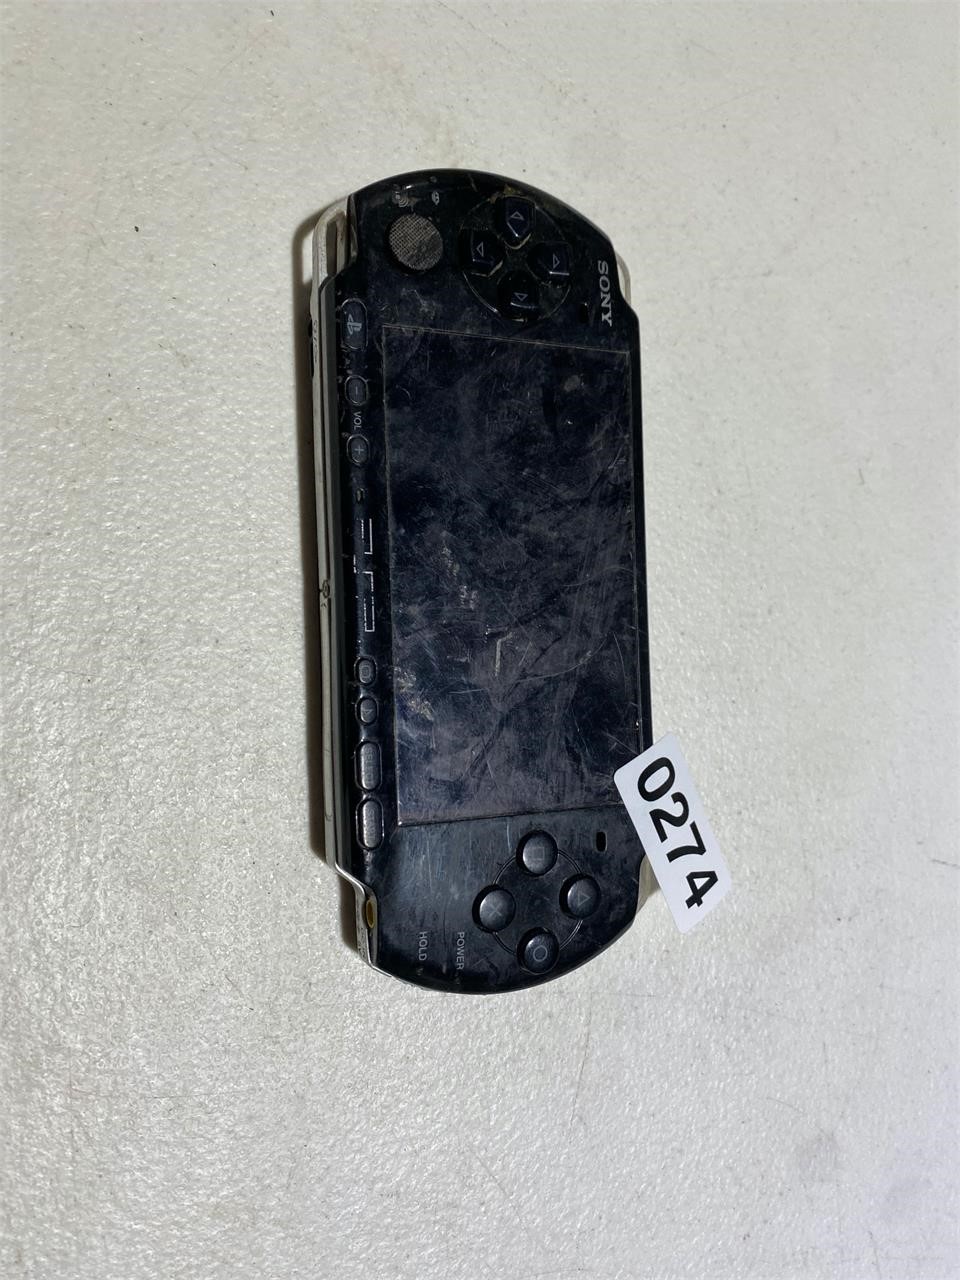 PSP No battery or power cord